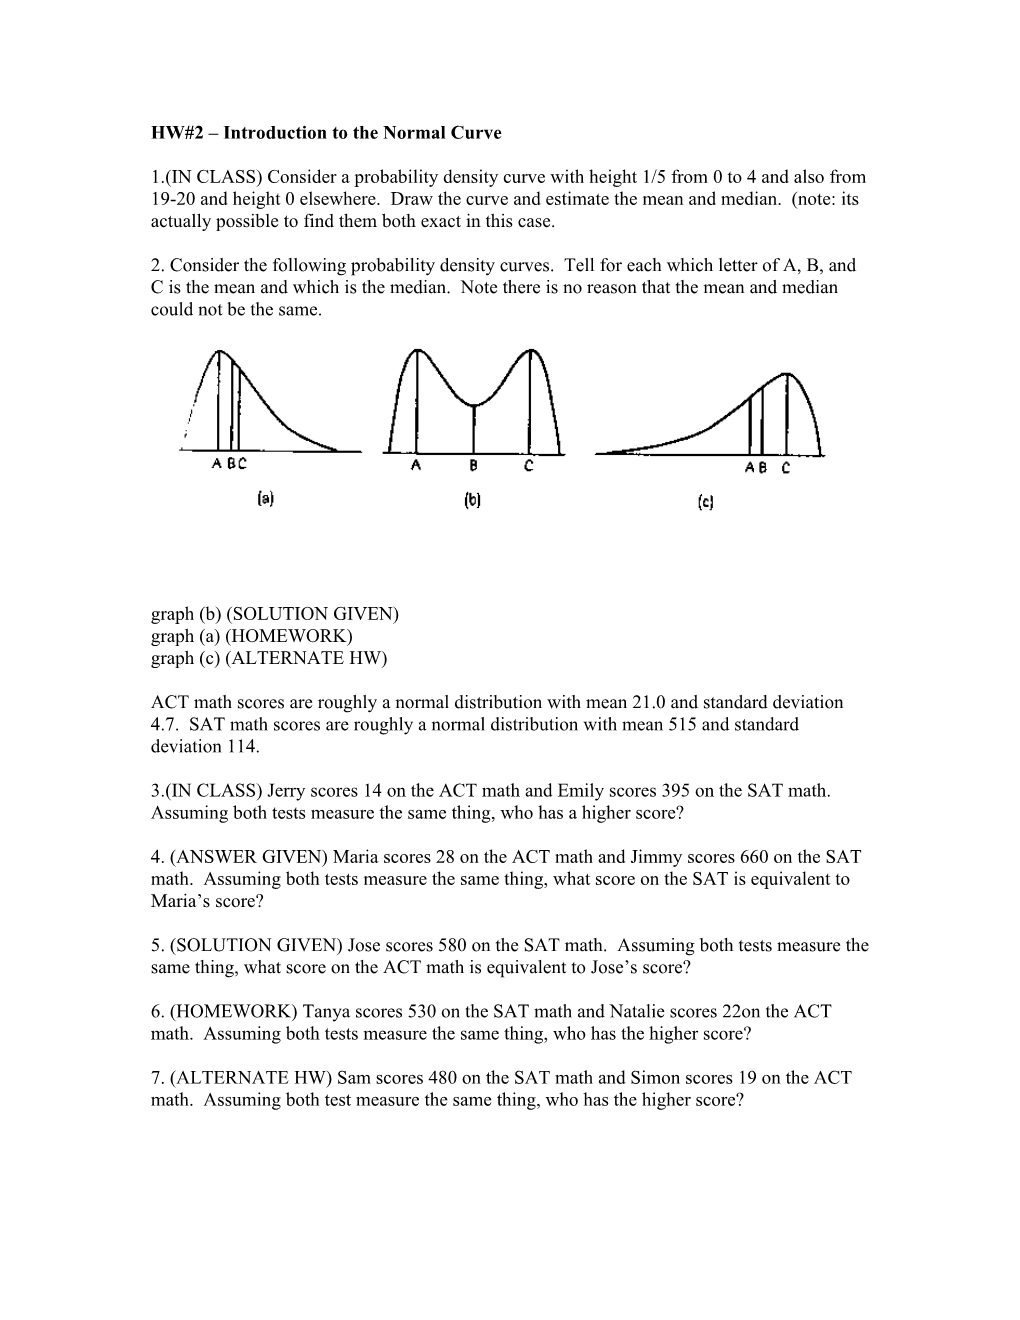 HW#2 Introduction to the Normal Curve